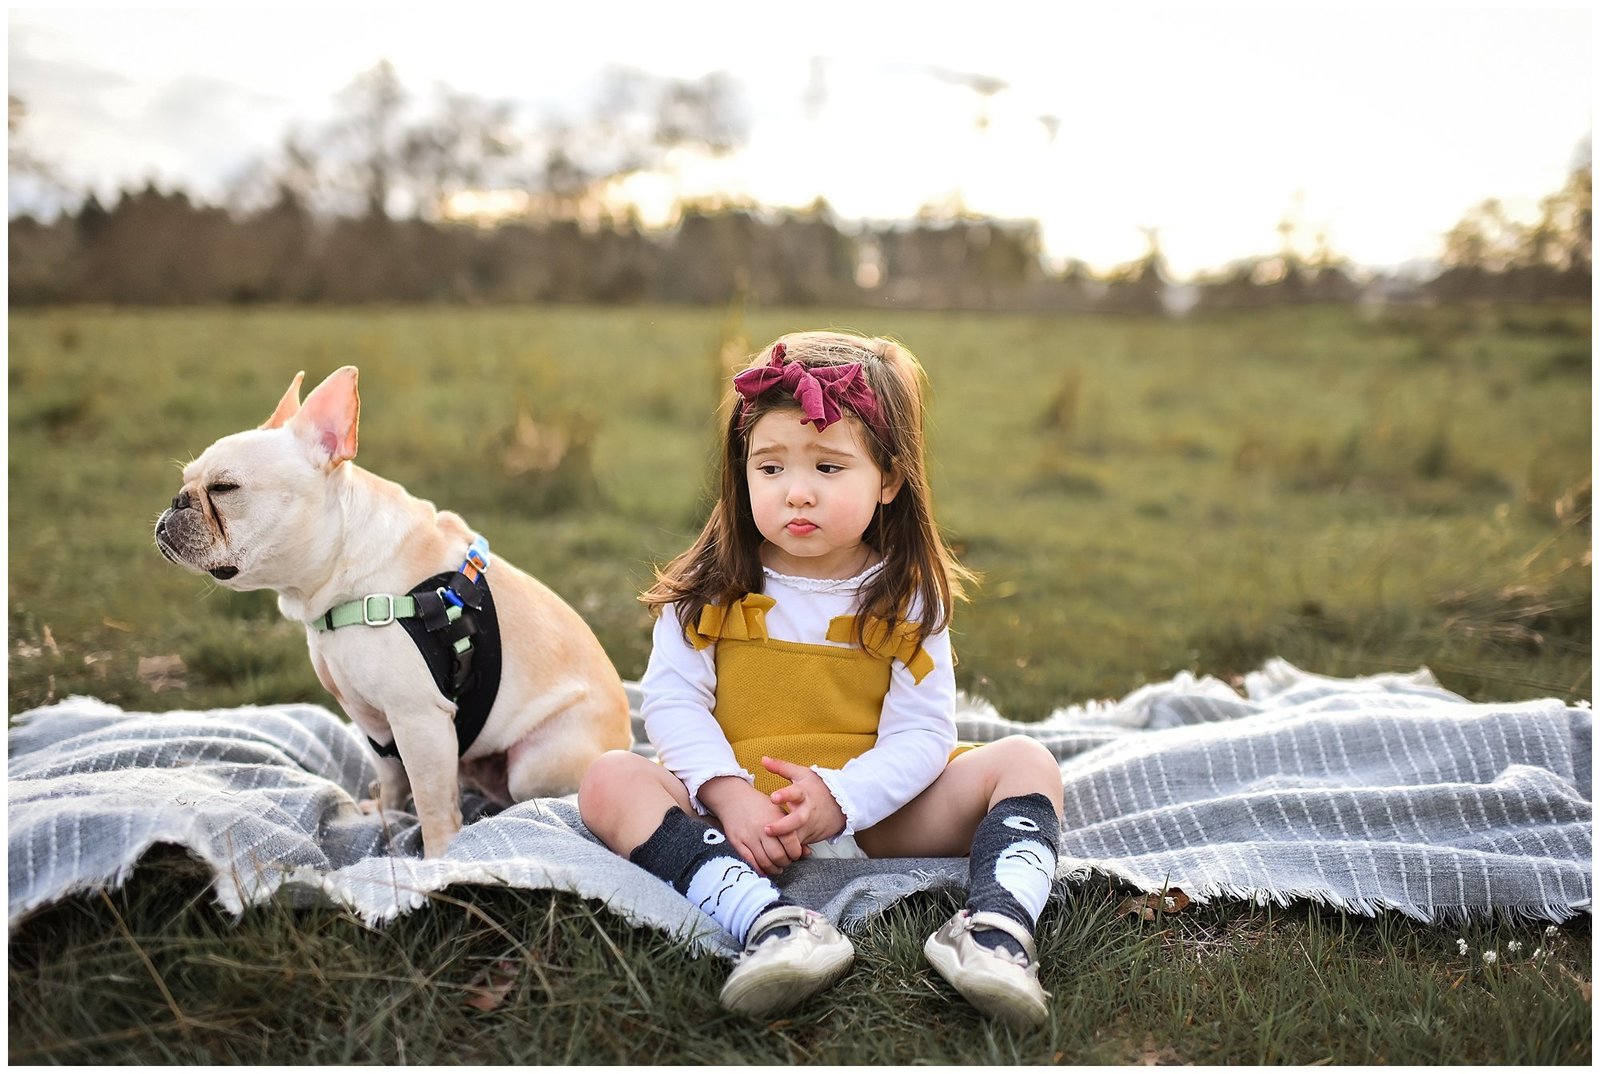 Little girl and french bulldog sitting field looking sad Emily Ann Photography Seattle Photographer.